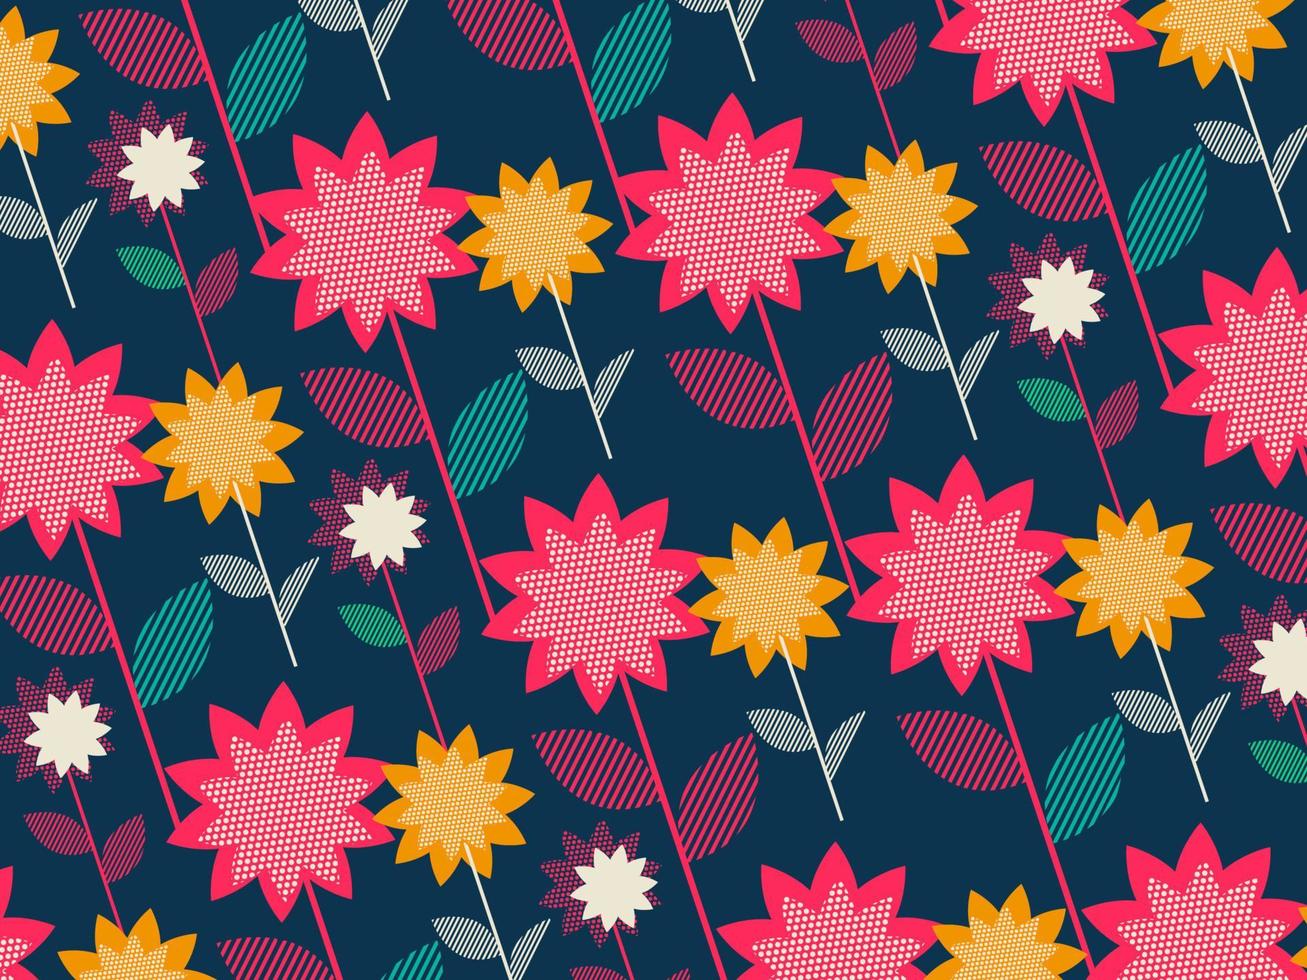 Abstract Colorful Seamless Floral Pattern Background. vector